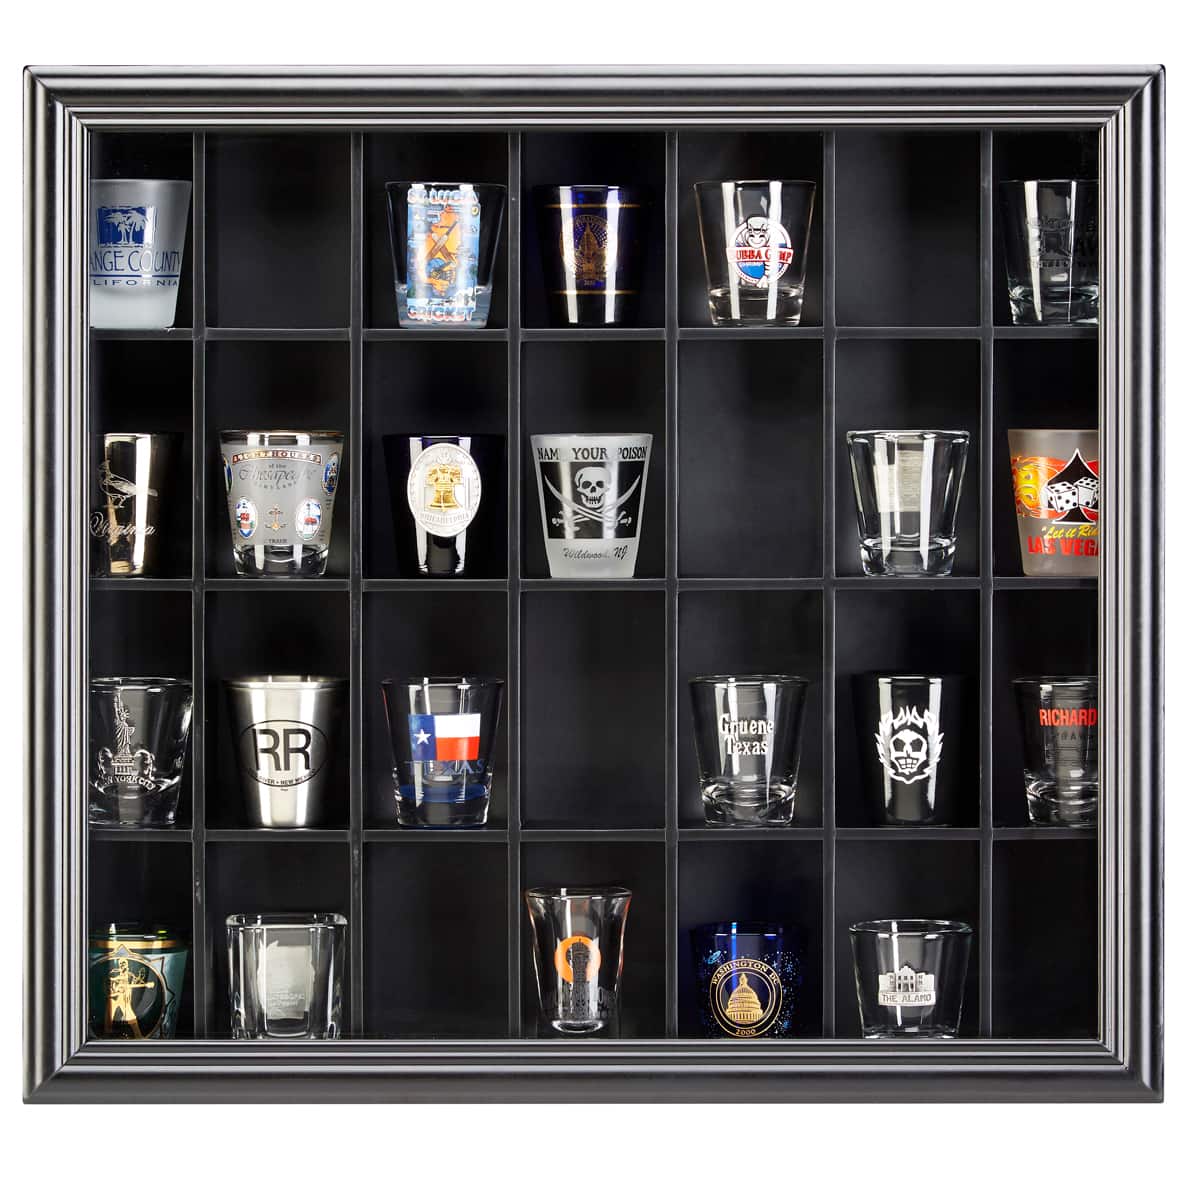 Shop For The Shot Glass Display Case By Studio Decor At Michaels